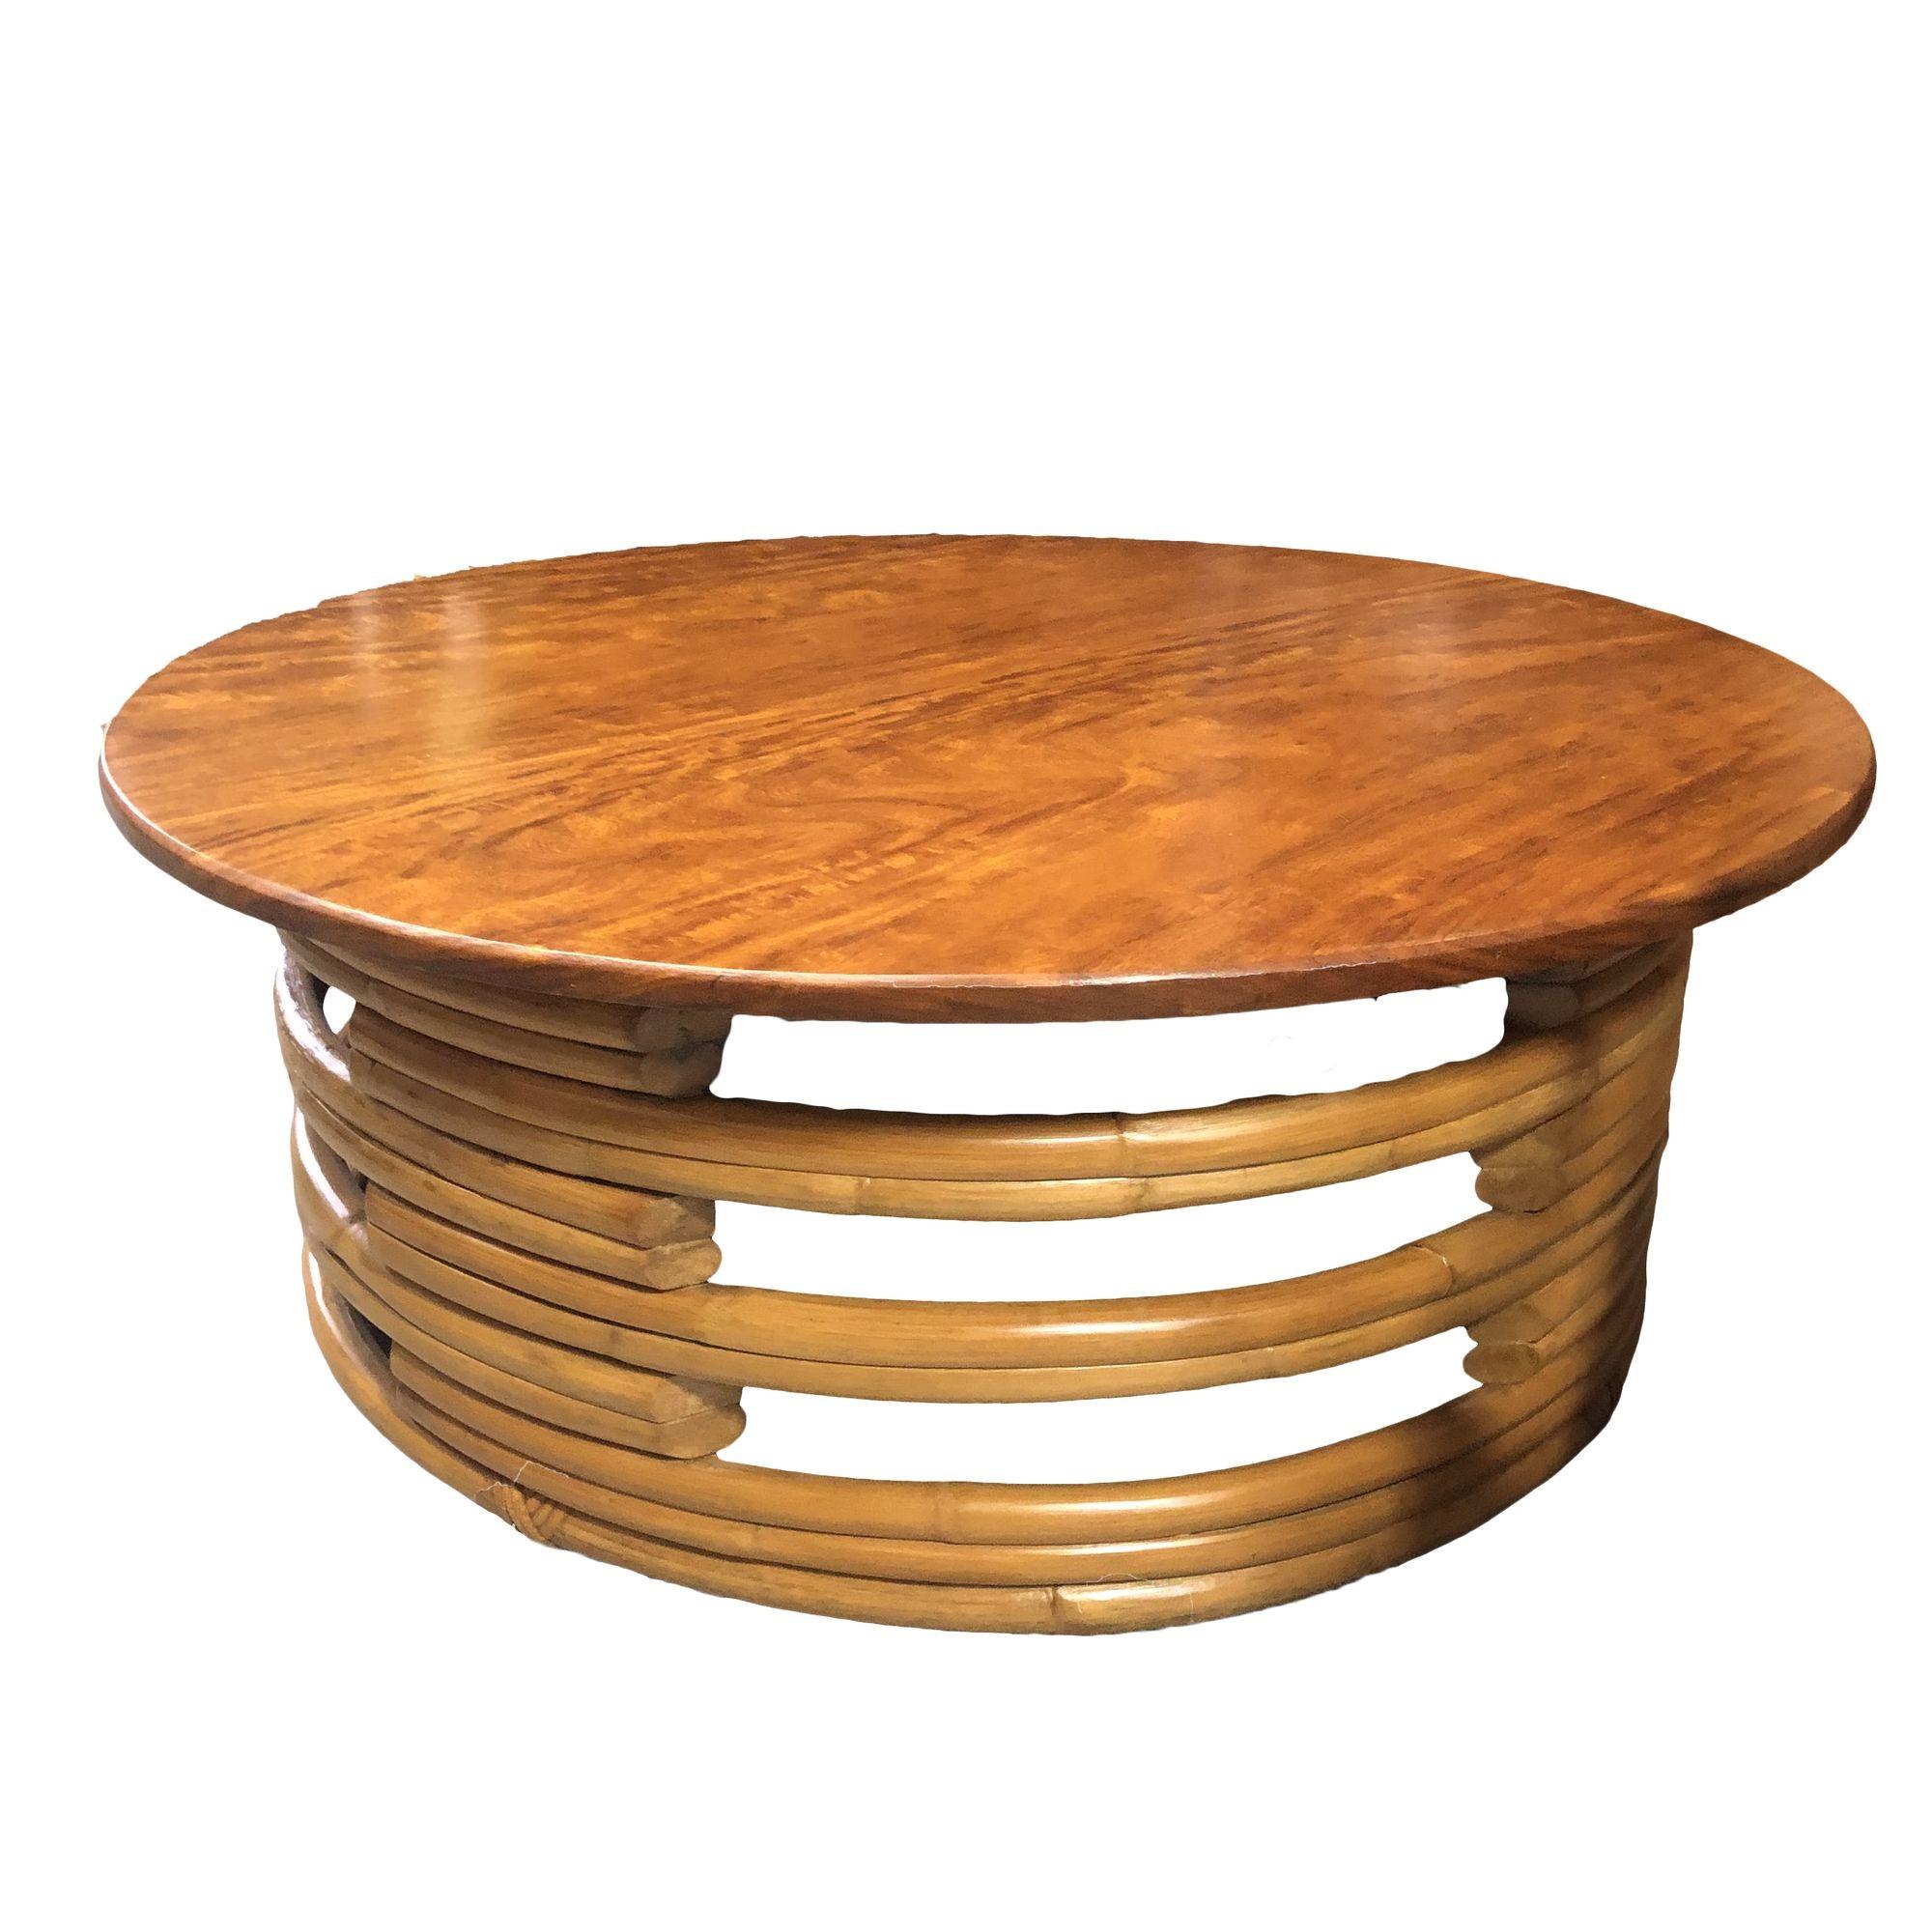 Stack round rattan coffee table, circa 1940. This rare rattan table features a unique stack rattan base made with cut-out sections which support the round Mahogany top.

Professionally restored to original specifications.

All rattan, bamboo and